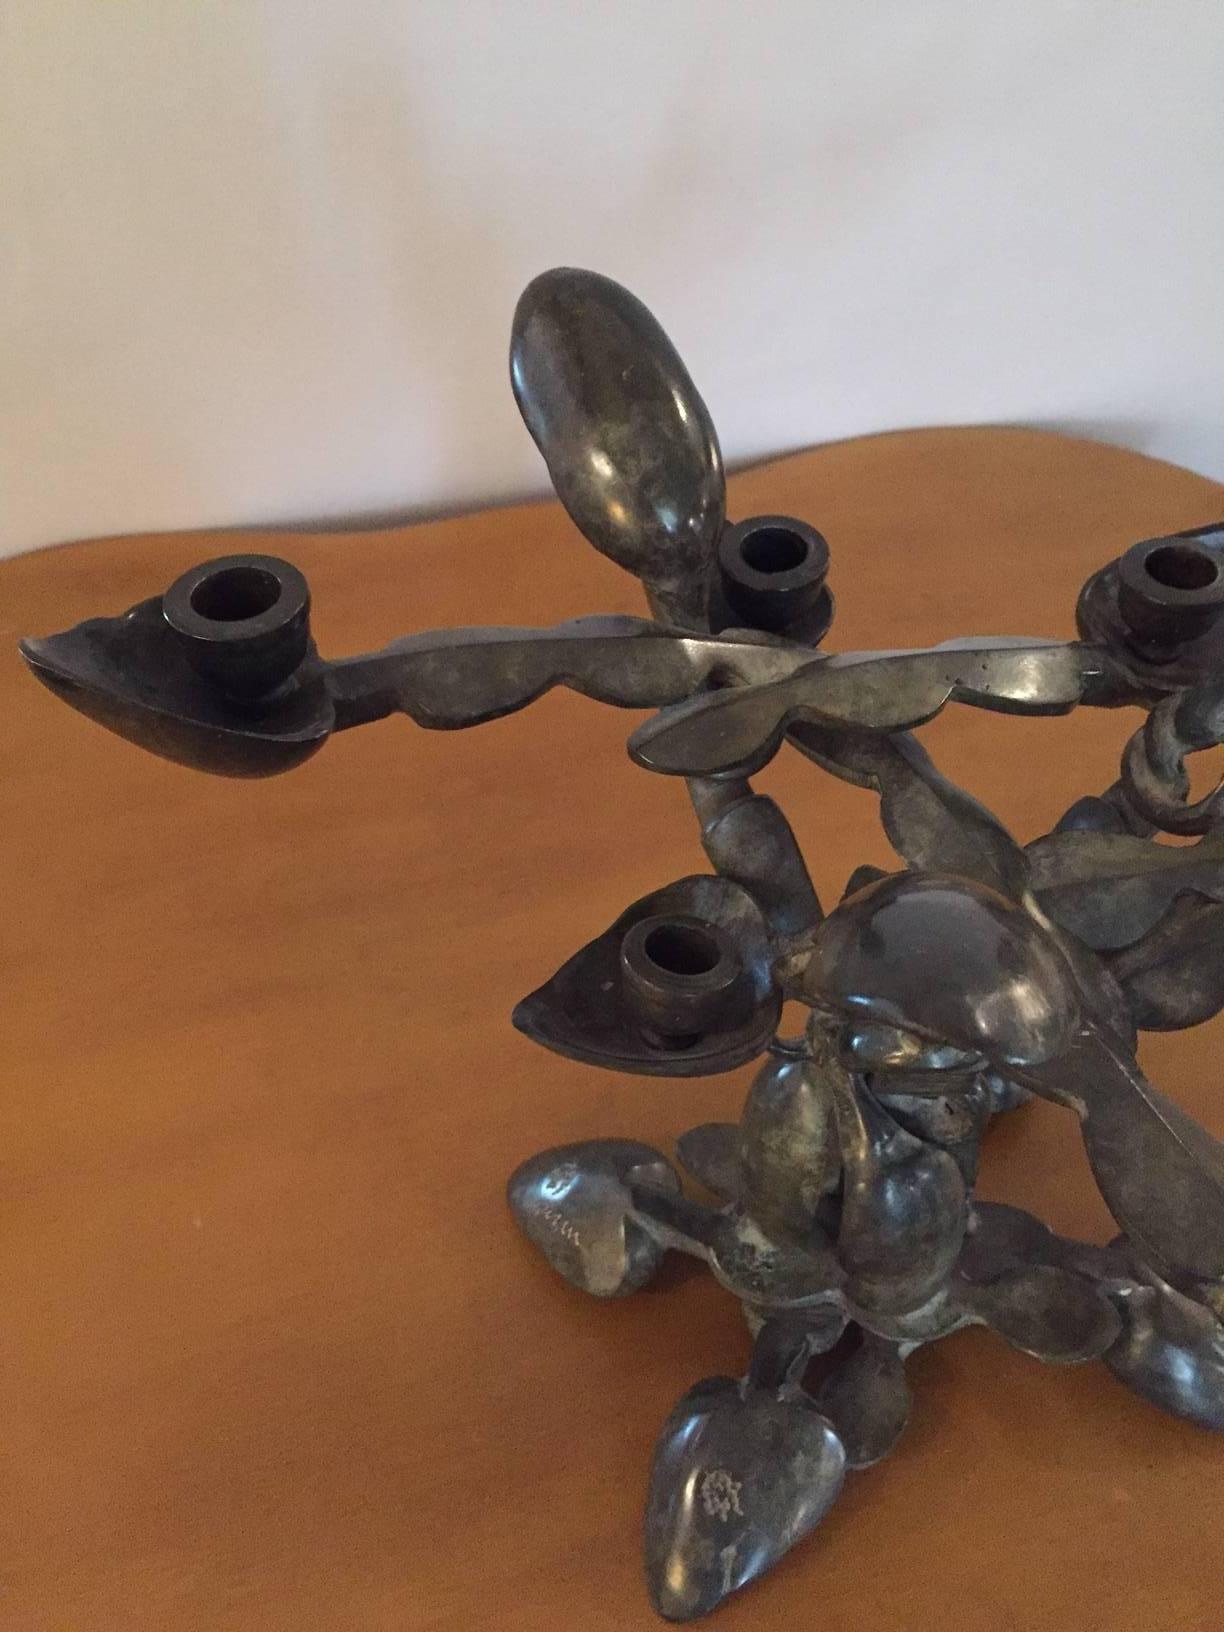 Organic Modern Arman, Candlestick, Bronze, Signed and Numbered 36/99, France